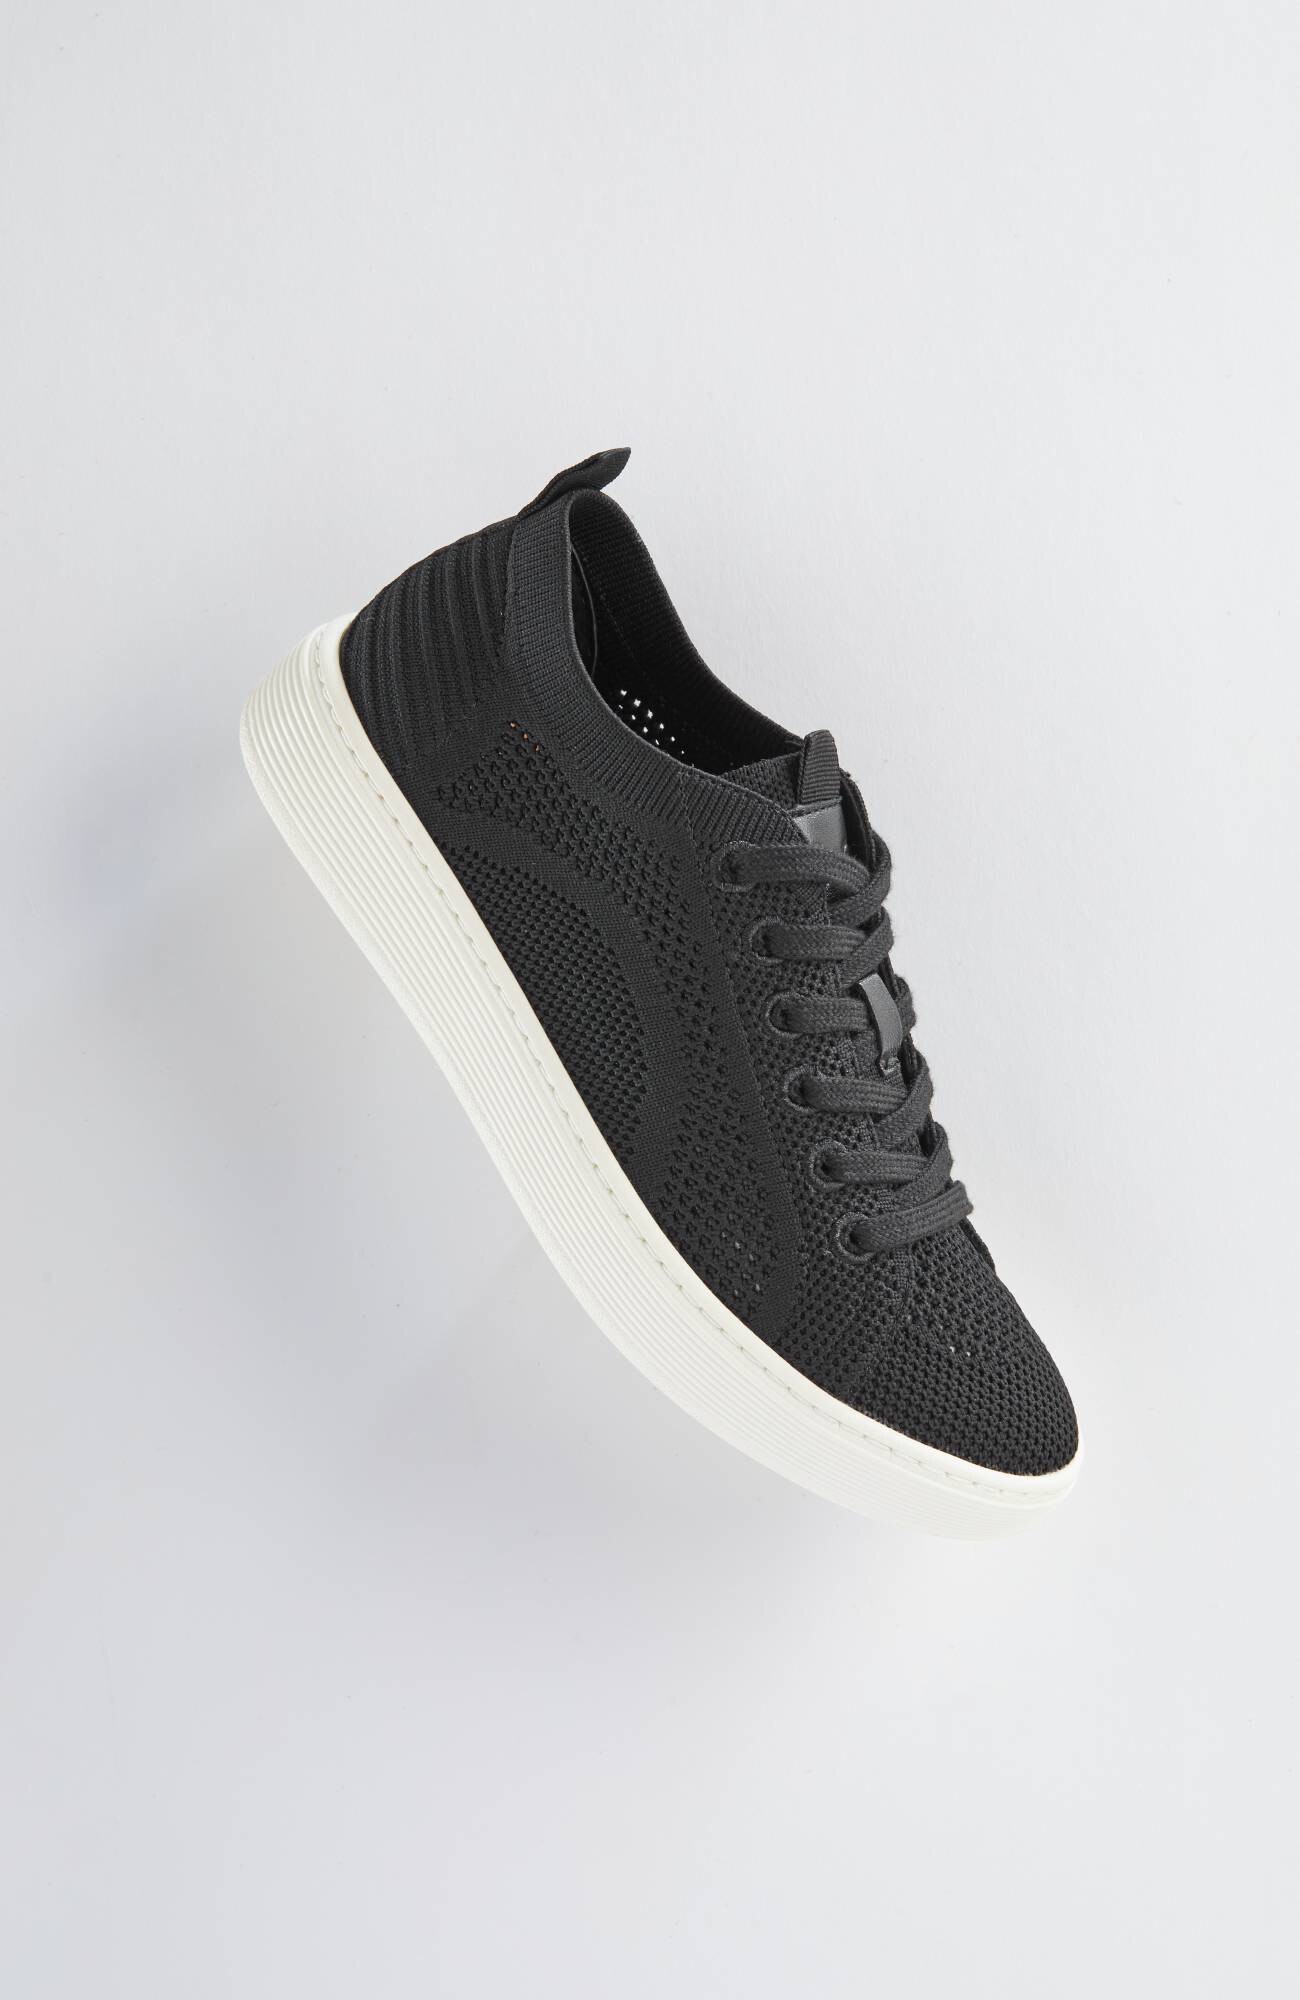 sofft somers knit sneaker